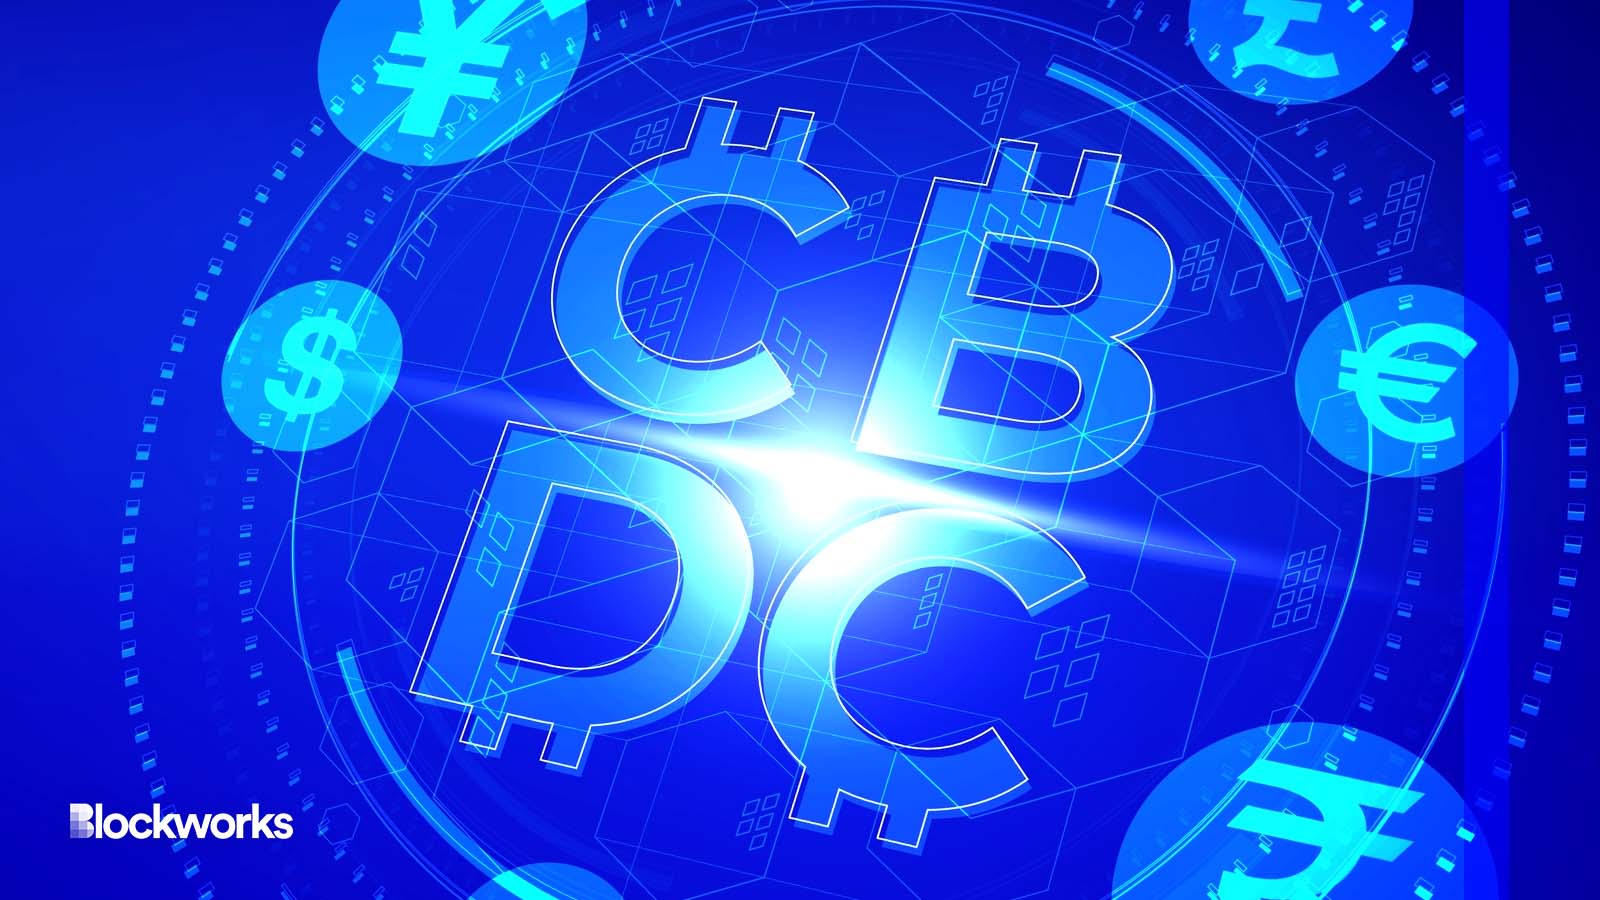 CBDCs Are Gaining Steam, Though Results May Vary